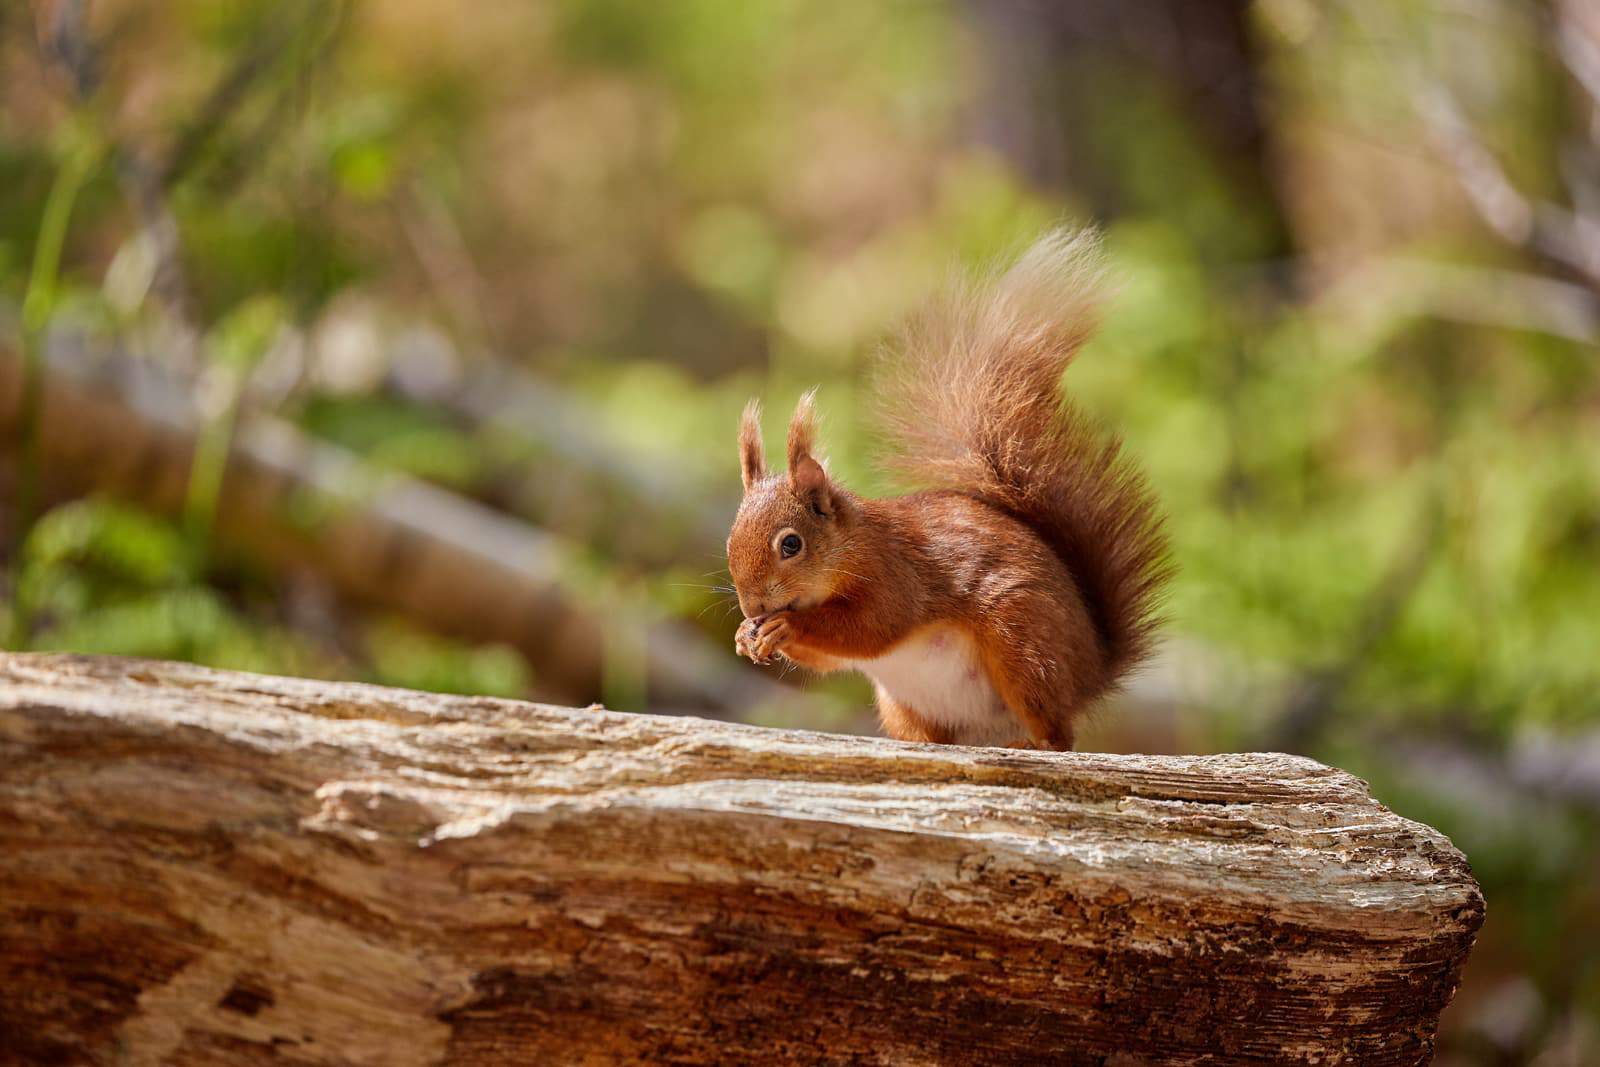 Brownsea Island is the largest island in Poole Harbour and one of the last safe havens for red squirrels in the south of the UK, boasting a significant population for its size. Photo ©Nigel Wood